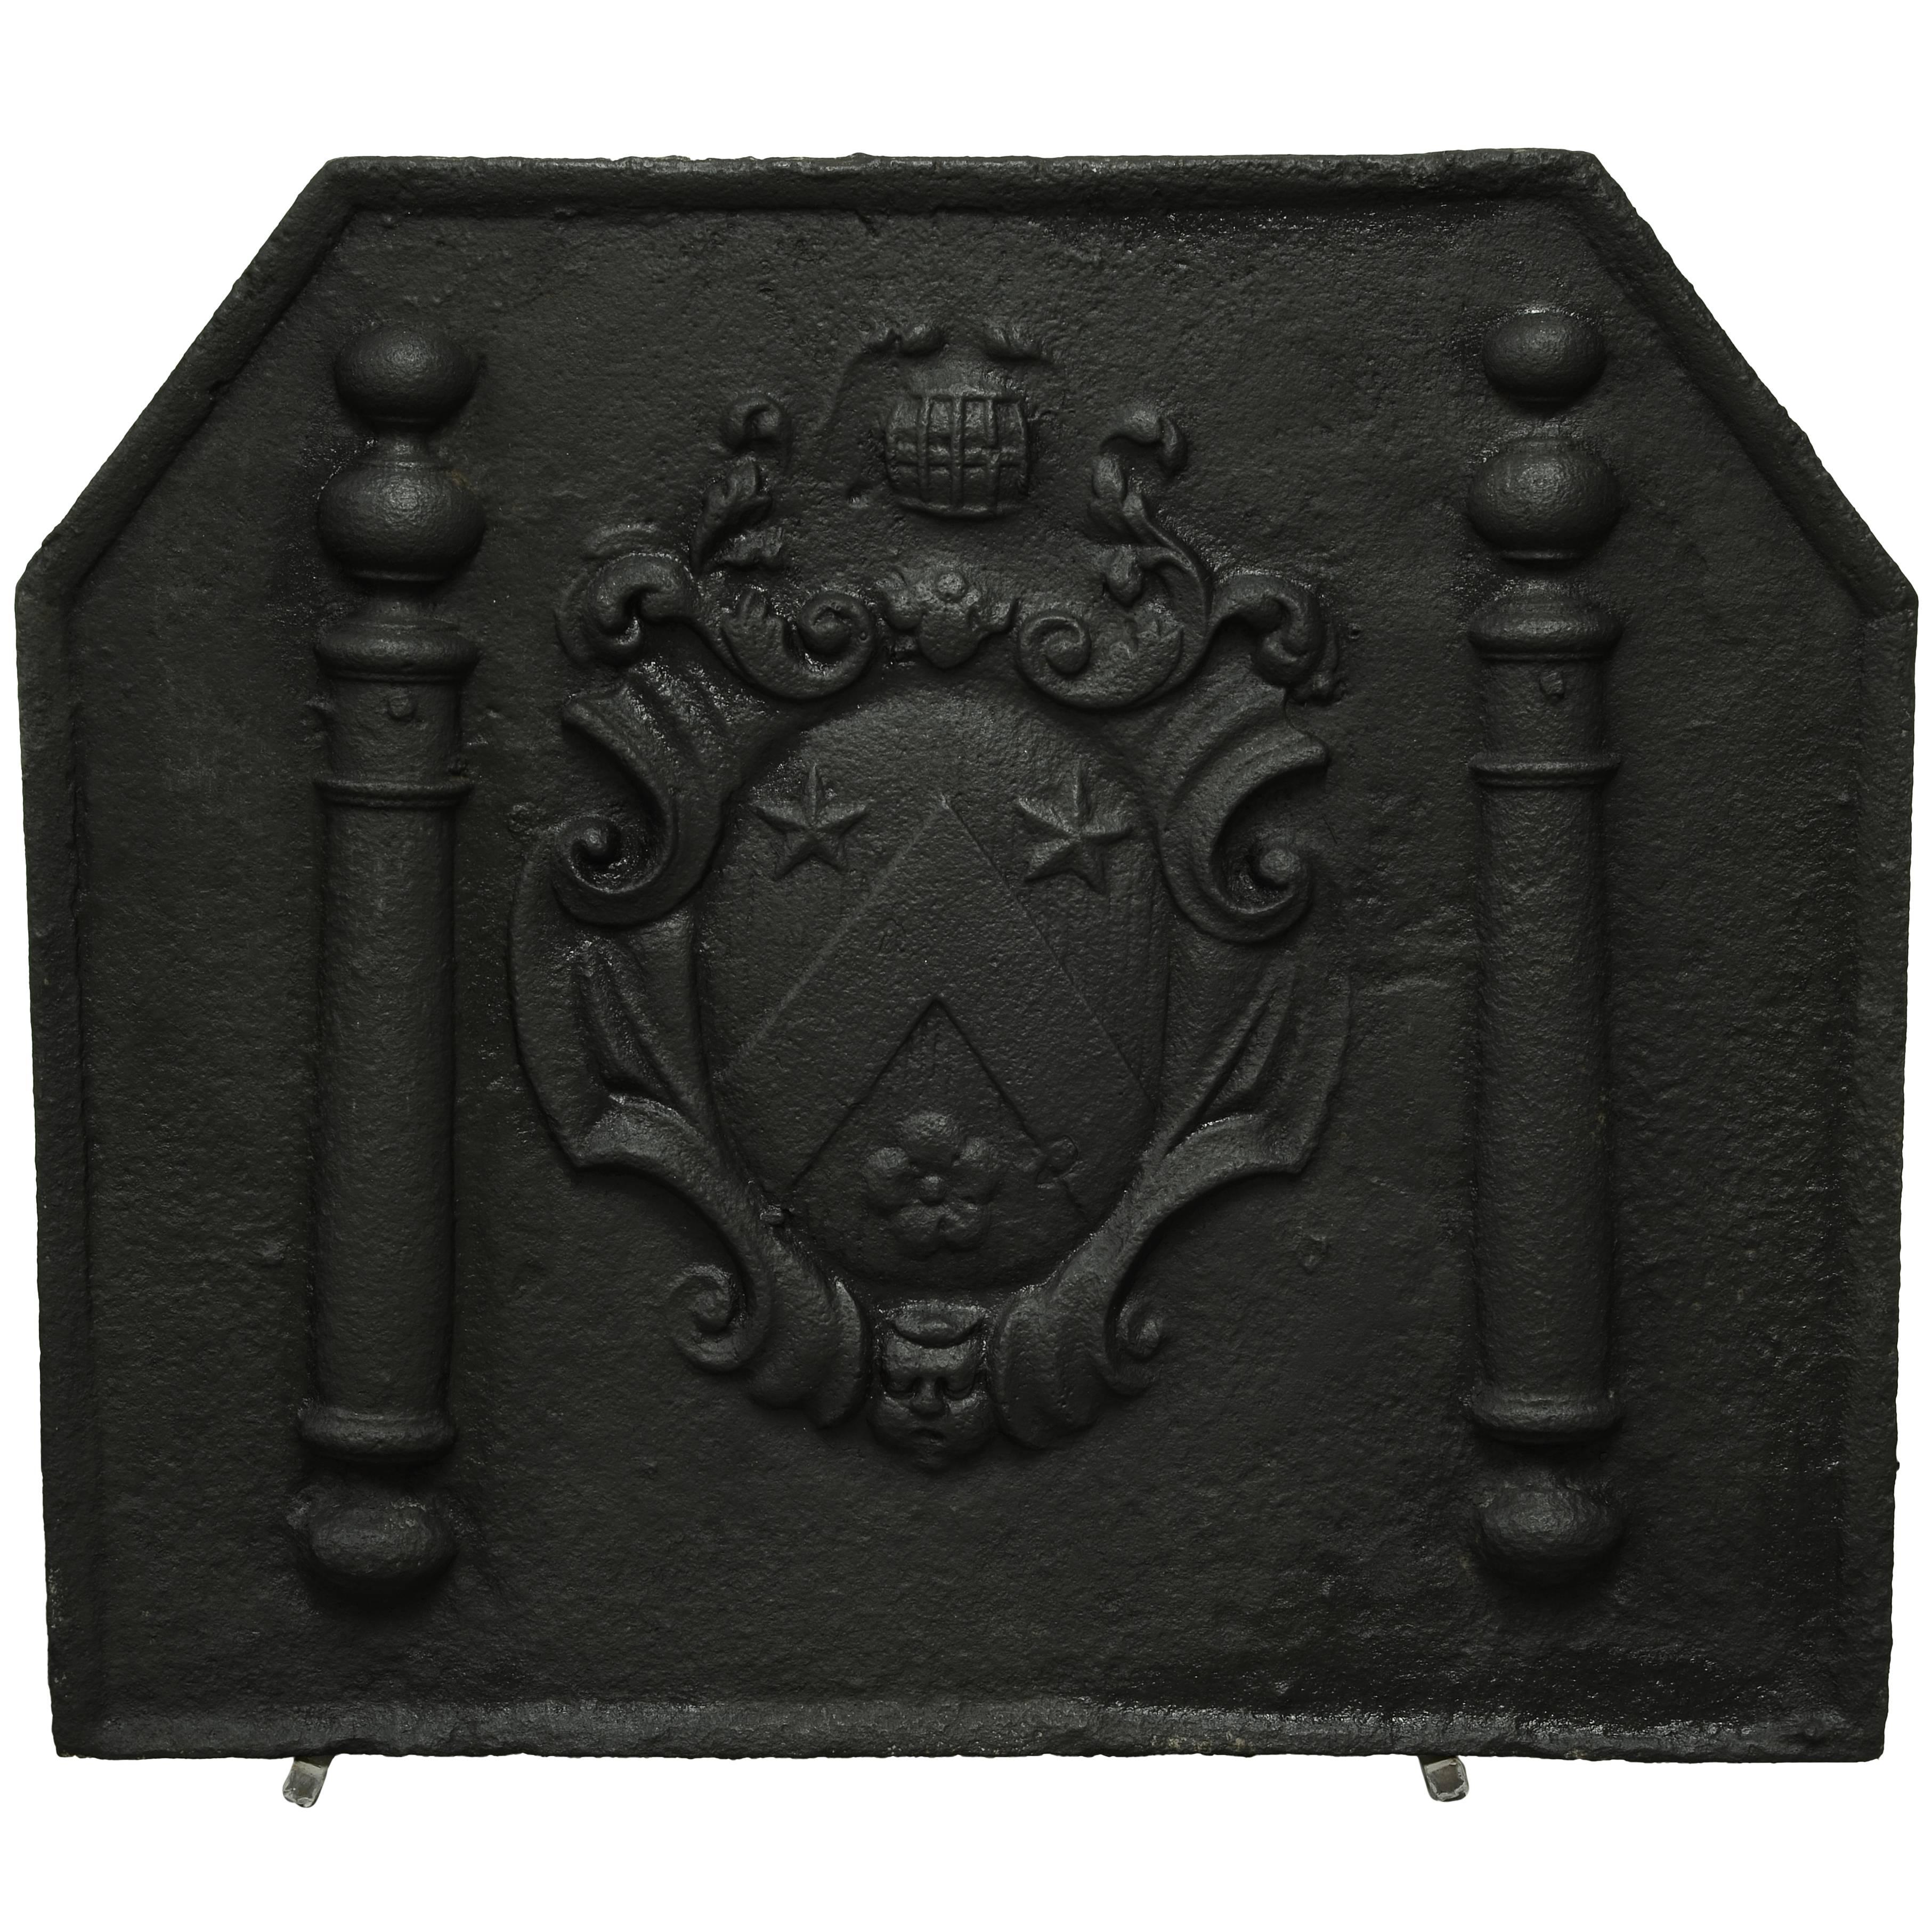 Antique French Fireback Displaying Pillars and Royal Arms of France